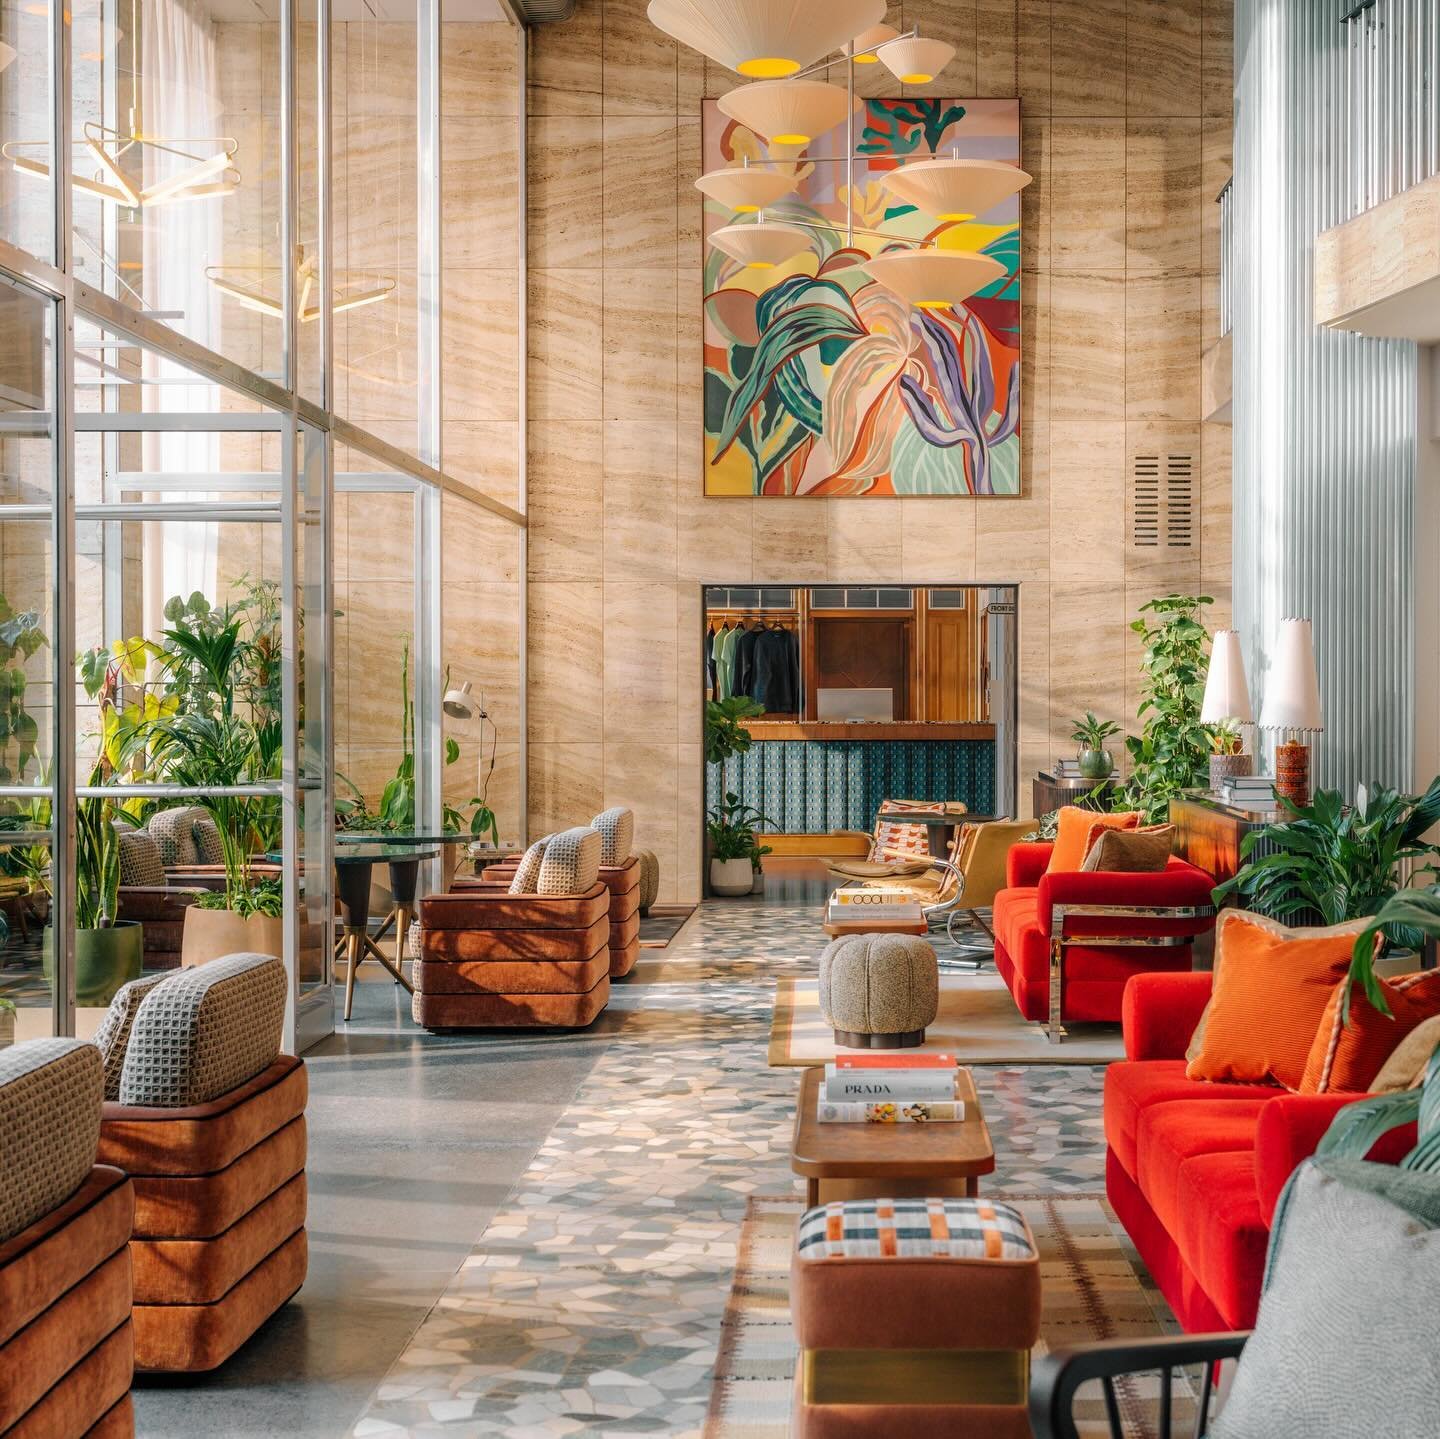 Introducing @thehoxtonhotel Vienna&hellip;☀ 

The new property features 196 rooms, a guests-only rooftop pool, Cuban-inspired rooftop bar @cayococo.vienna , French-meets-NYC all-day bistro @bouvier_vienna and @salonparadise_vienna a basement speakeas